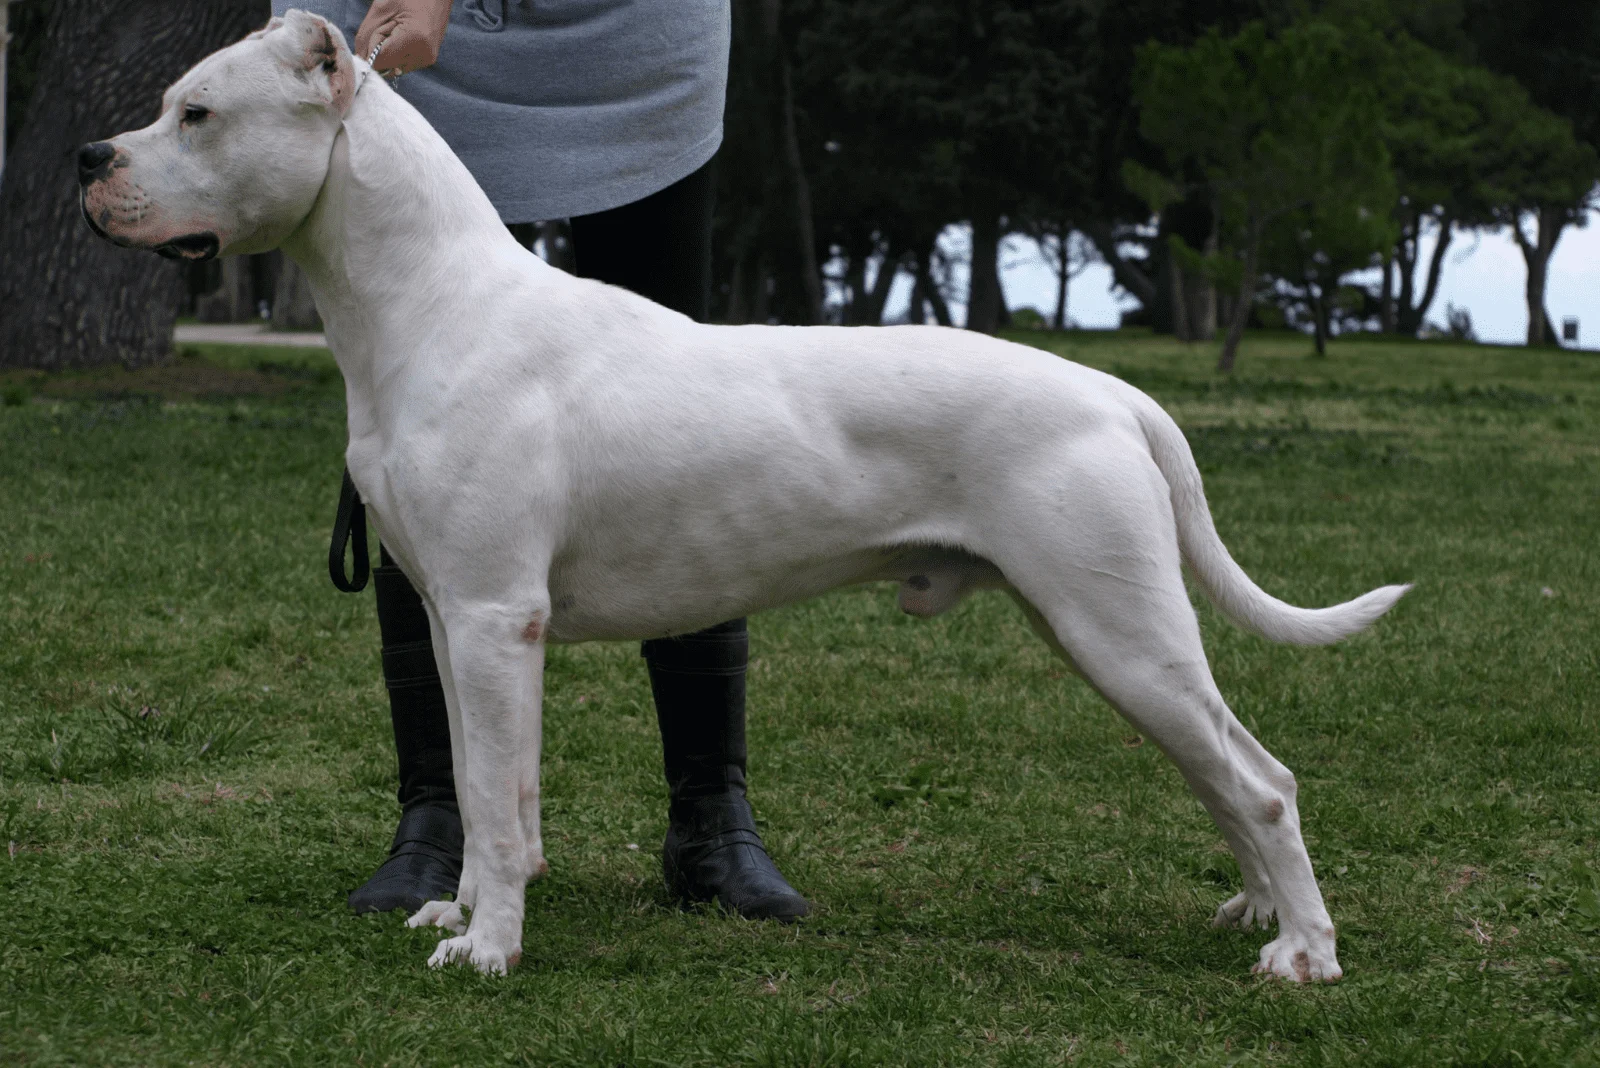 Dogo Argentino Pitbull Mix stands on a leash